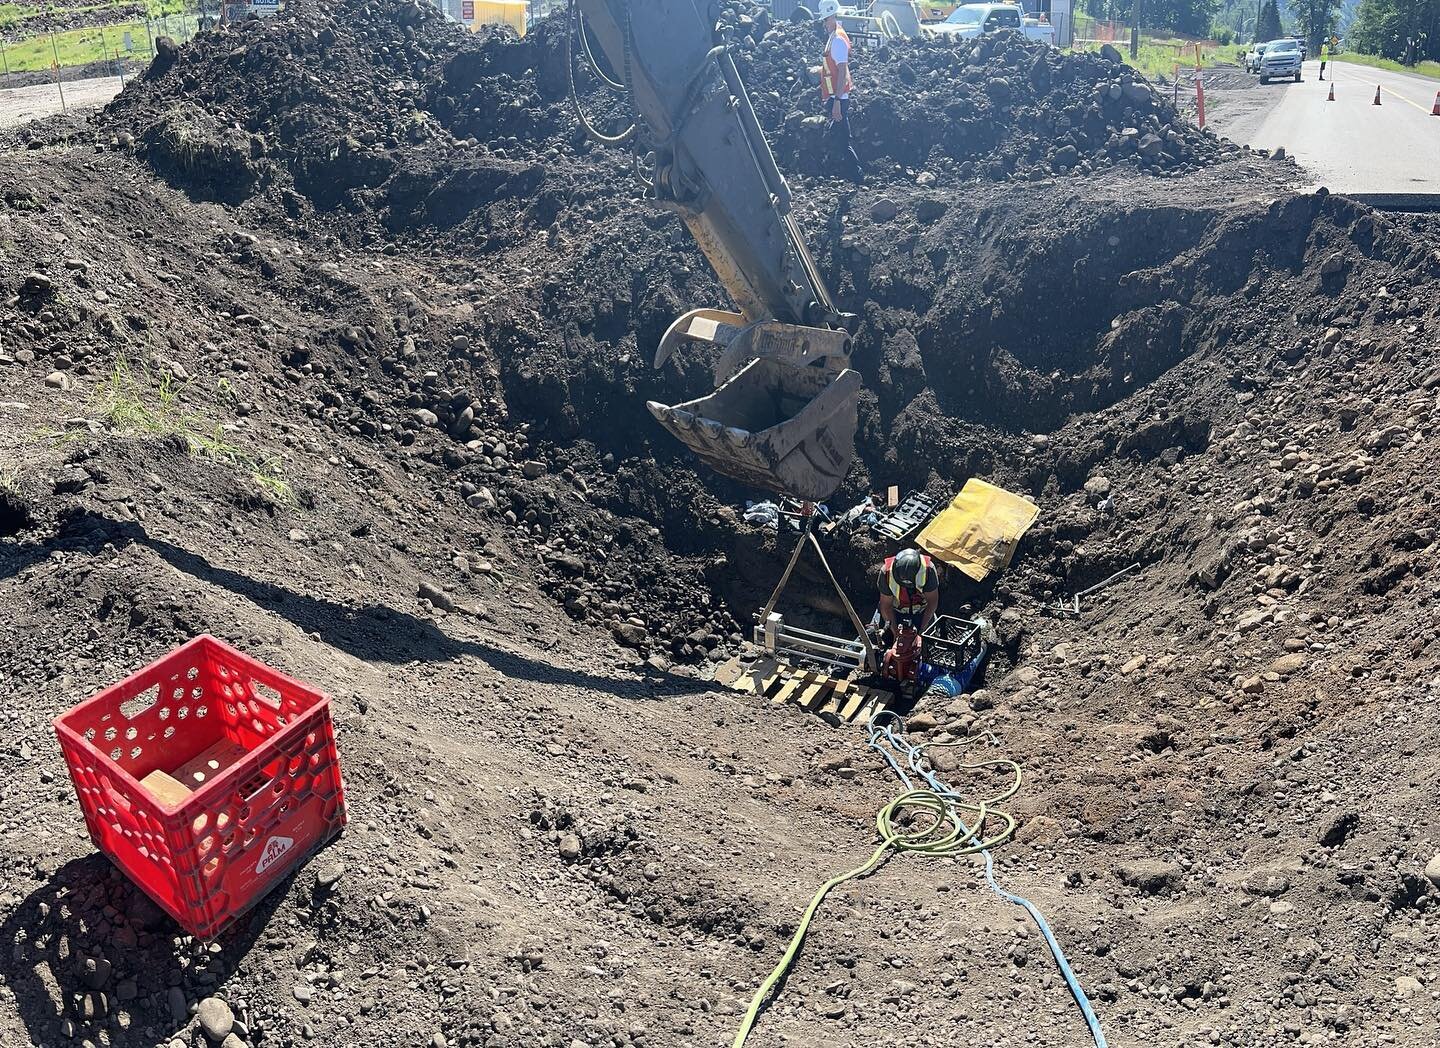 Going down ⬇️ Graham made a trip to Sparwood to do a tap for Mitchell Excavation. 

#hottapping #plumbing #construction #trucks #hydrant #fyp #yyc #alberta #f4f #work #britishcolumbia #saskatchewan #hvac #clow